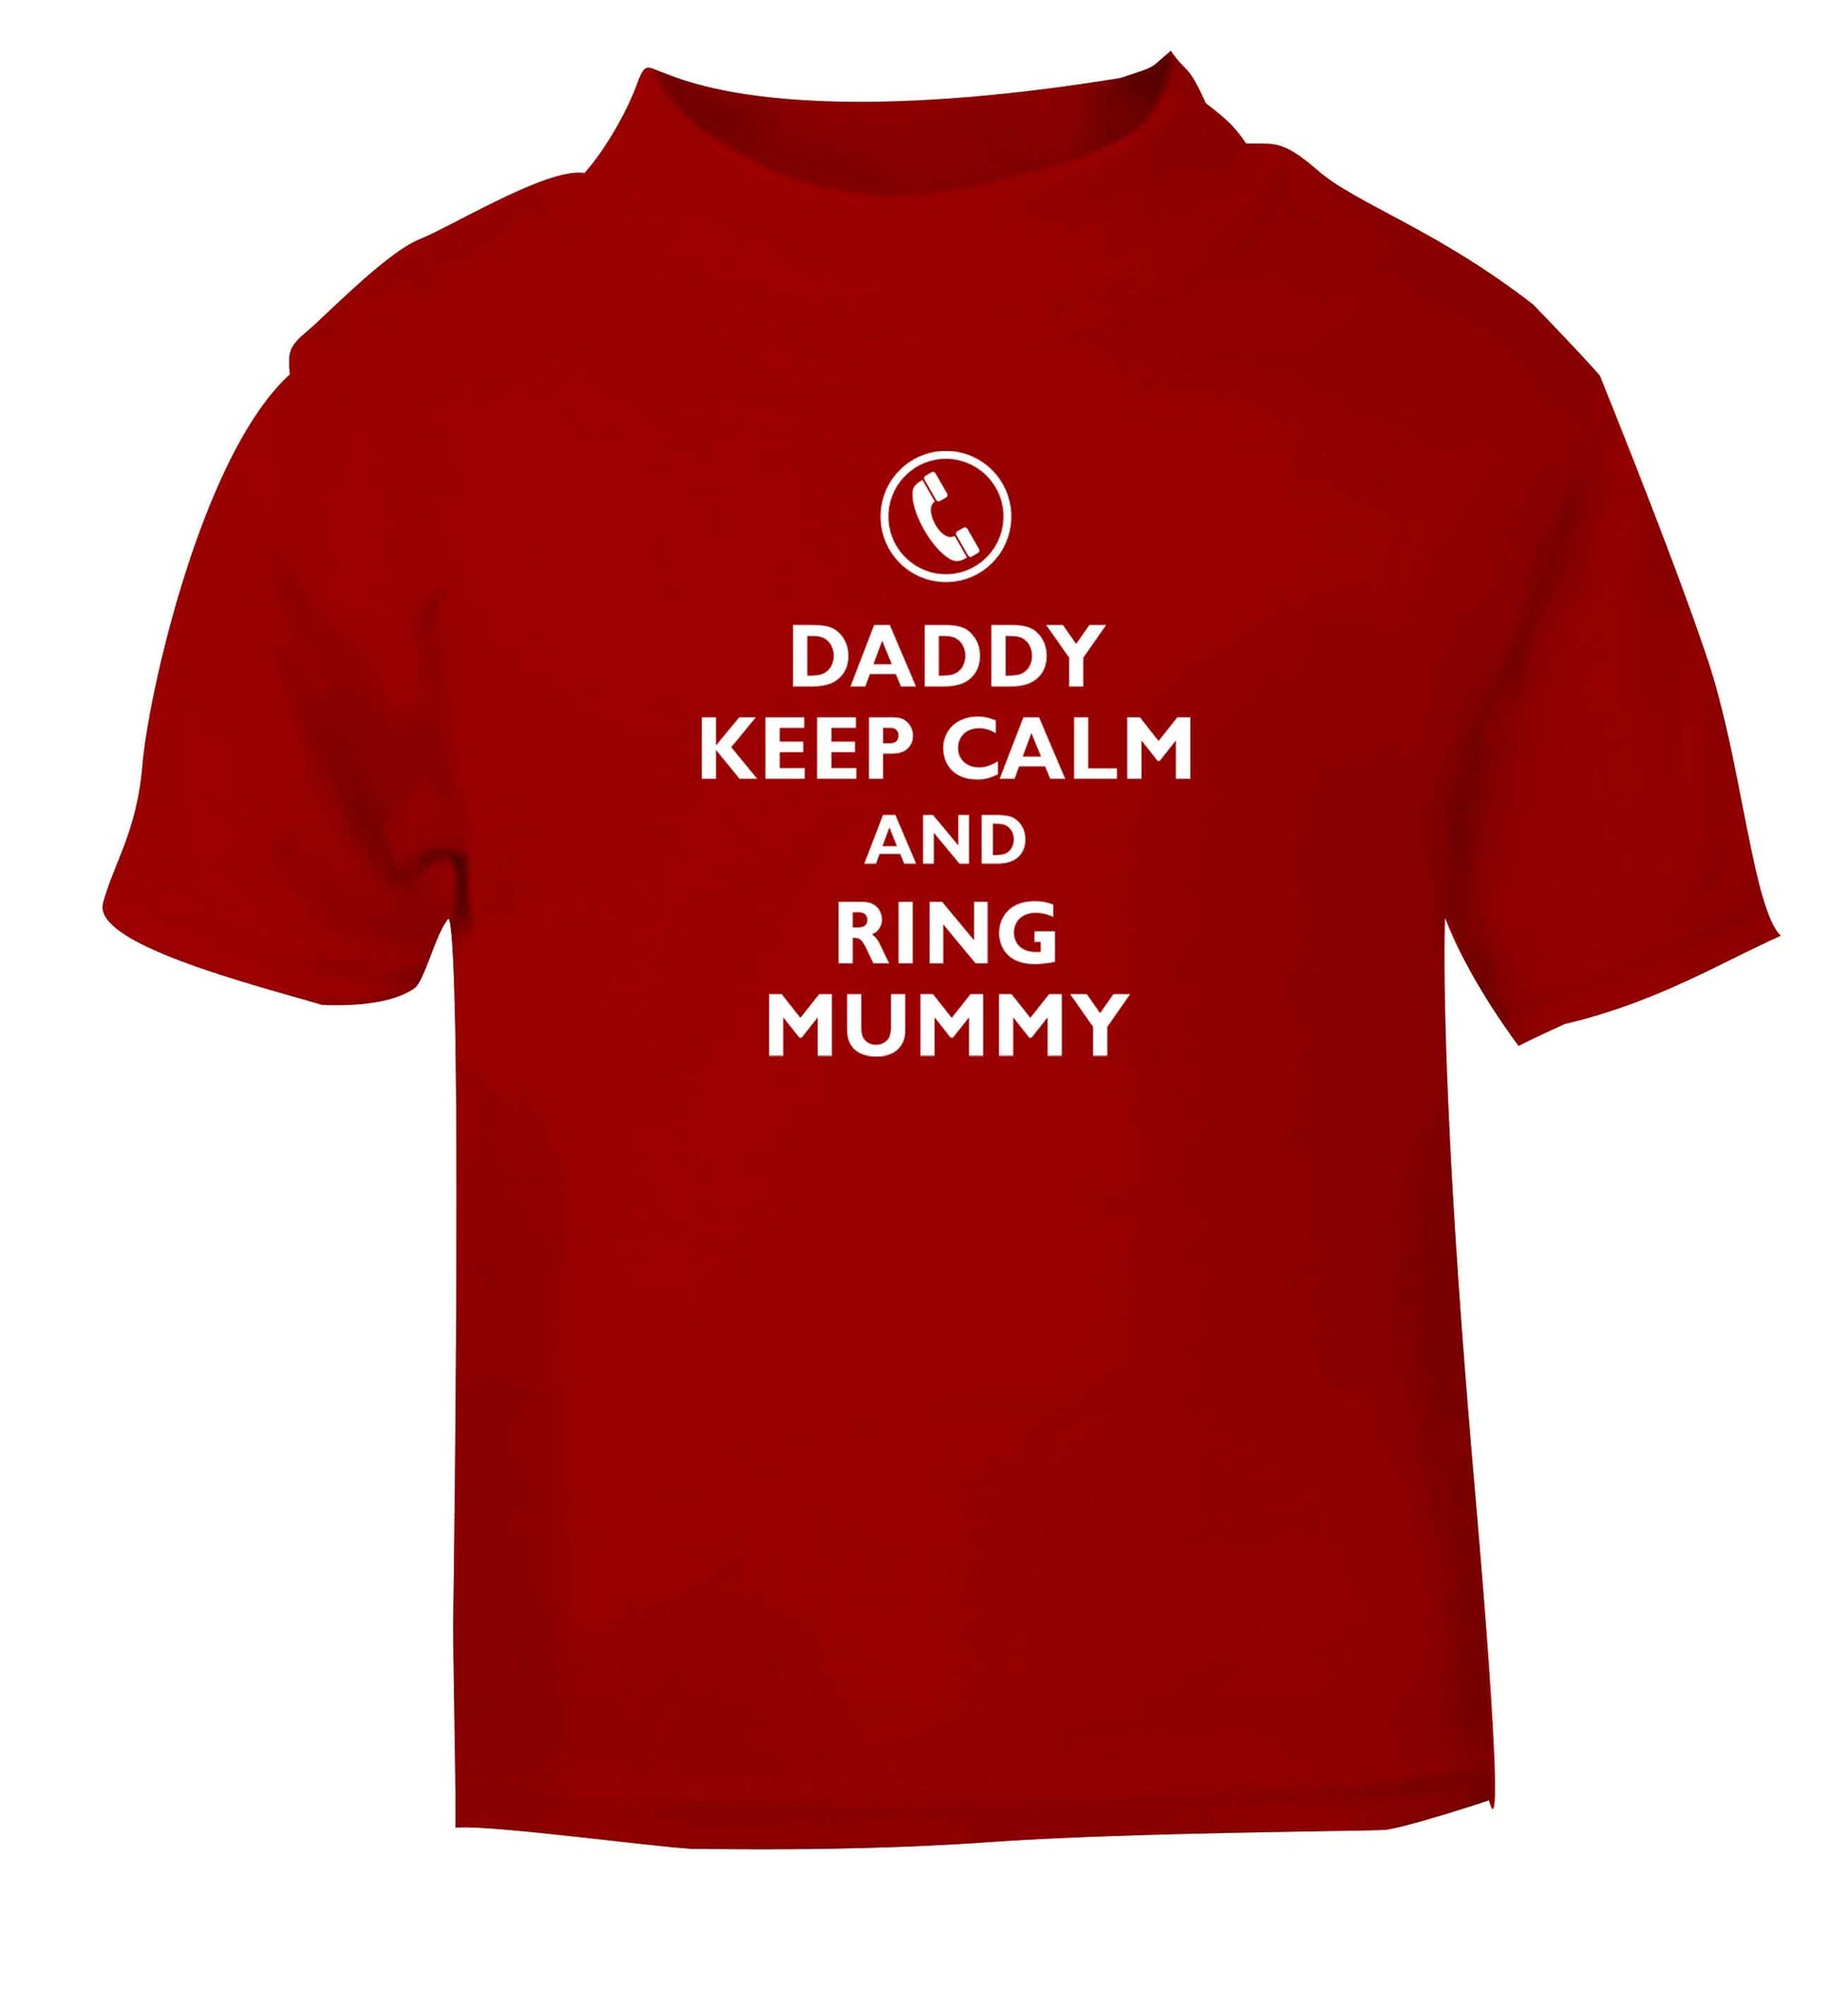 Daddy keep calm and ring mummy red baby toddler Tshirt 2 Years